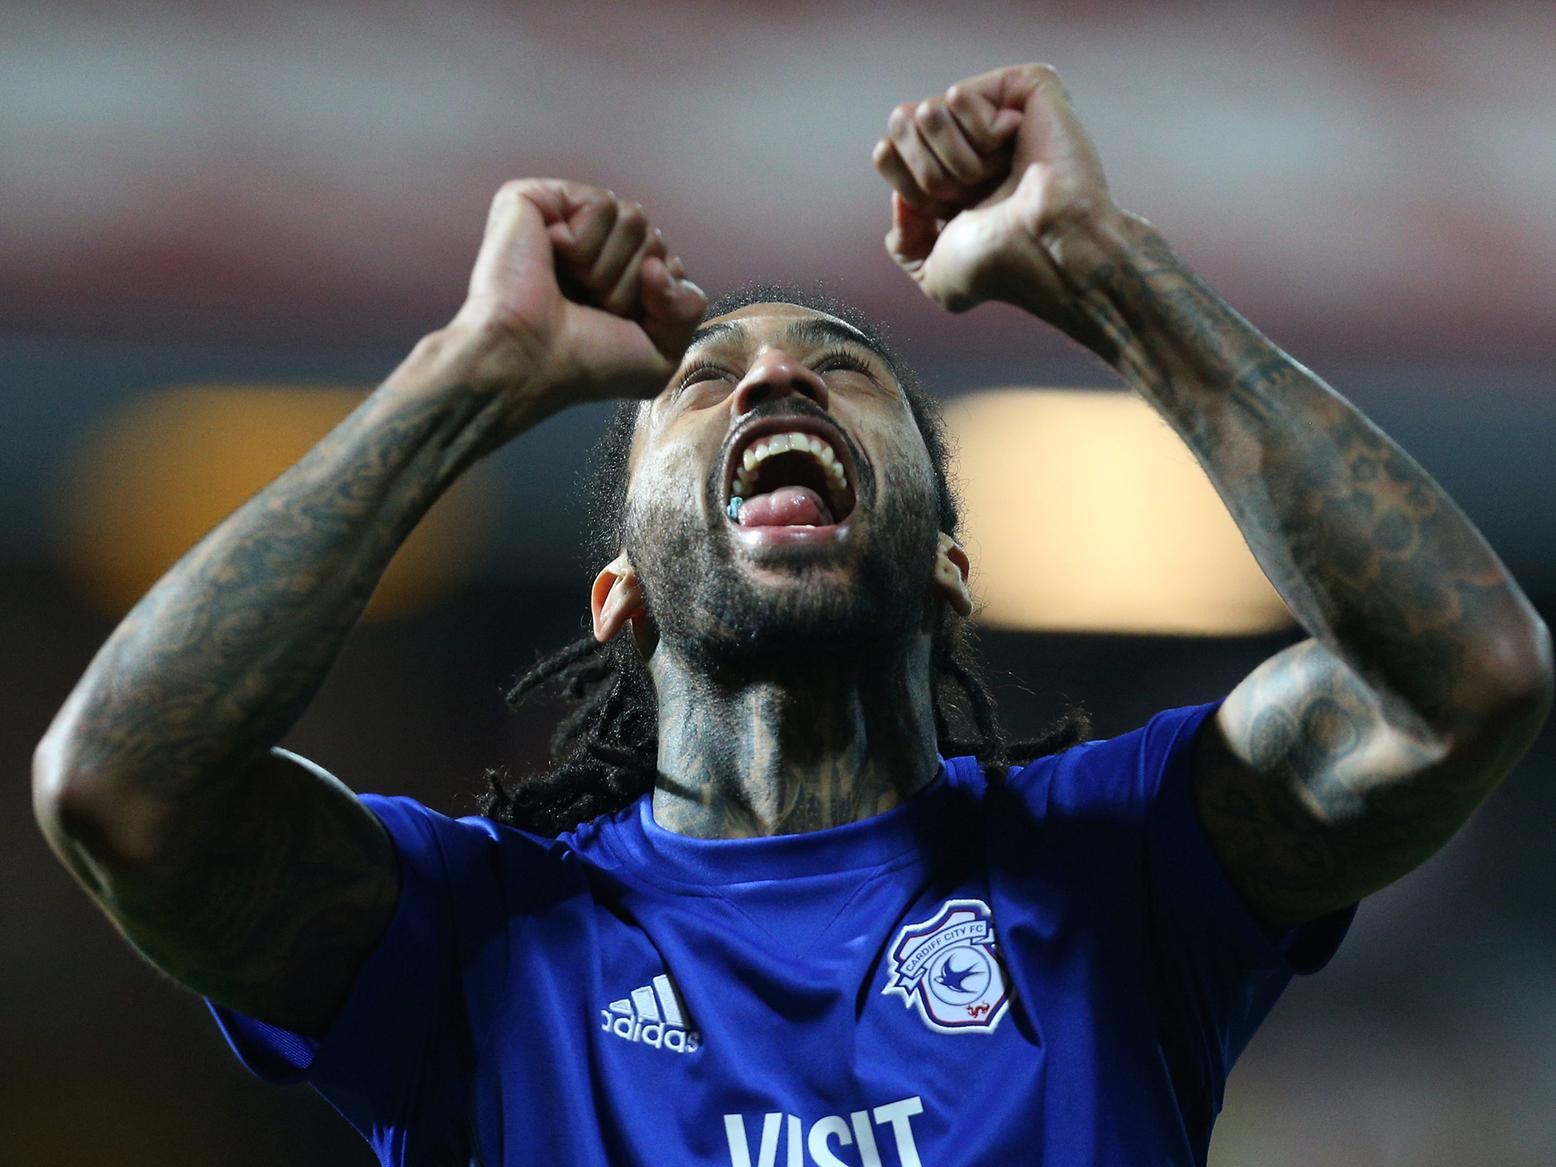 Cardiff City have re-signed defender Armand Traore on a short-term deal until January, as they look to patch up their injury-ravaged side until the new year. (Wales Online)